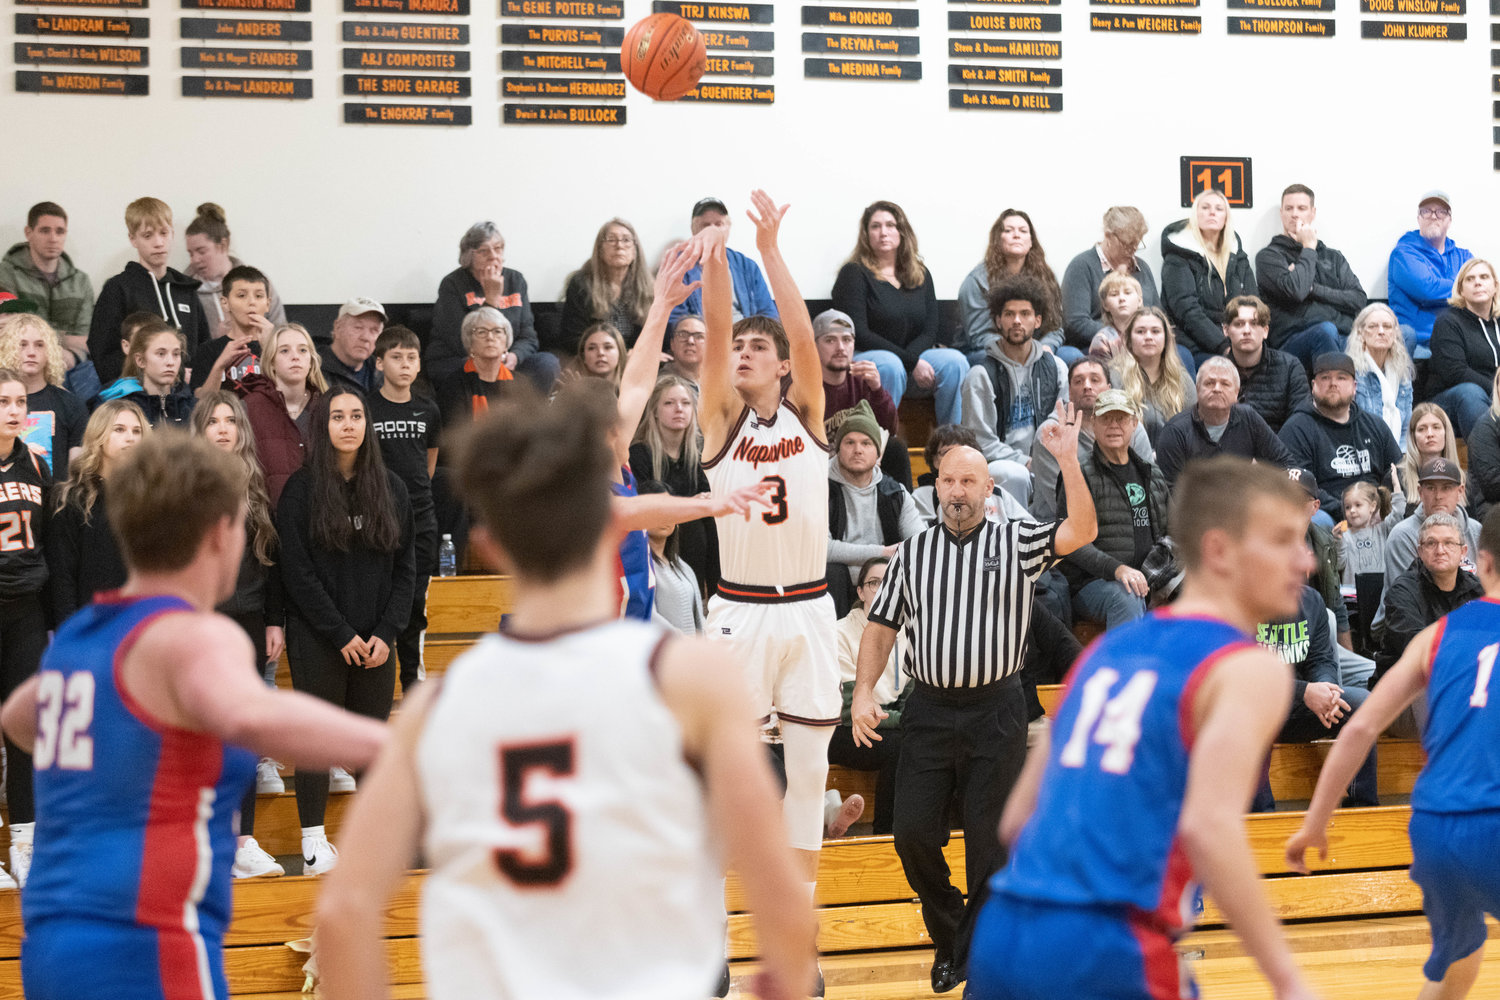 James Grose puts up the first of his 10 3-pointers during Napavine's 81-50 win over Willapa Valley on Dec. 27.